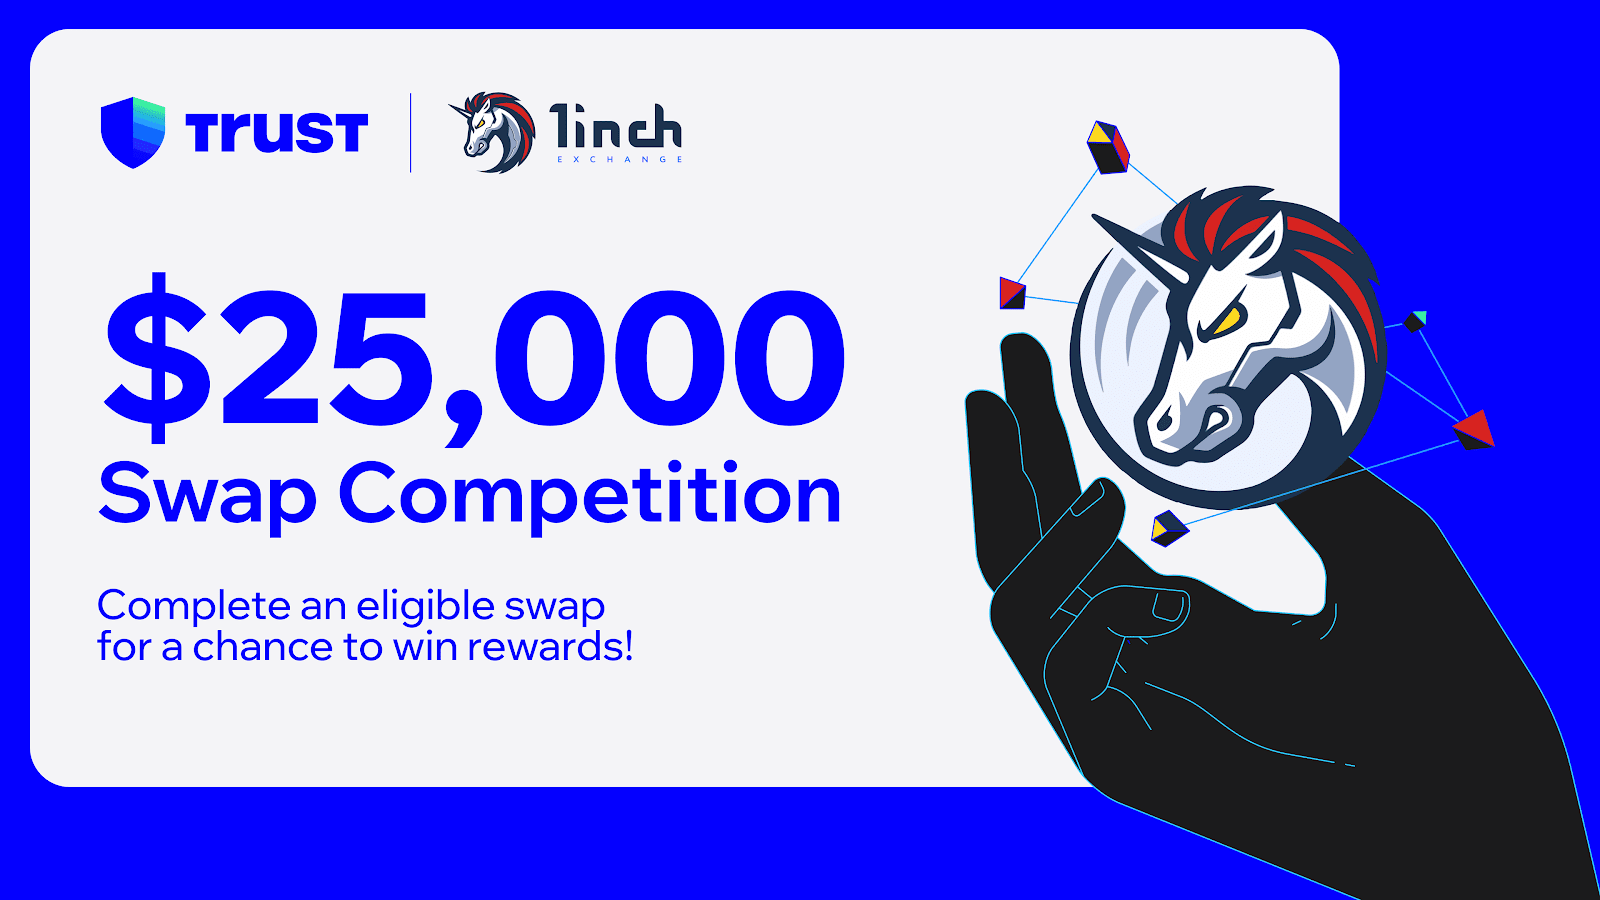 1inch x Trust Wallet: $25,000 Swap Competition